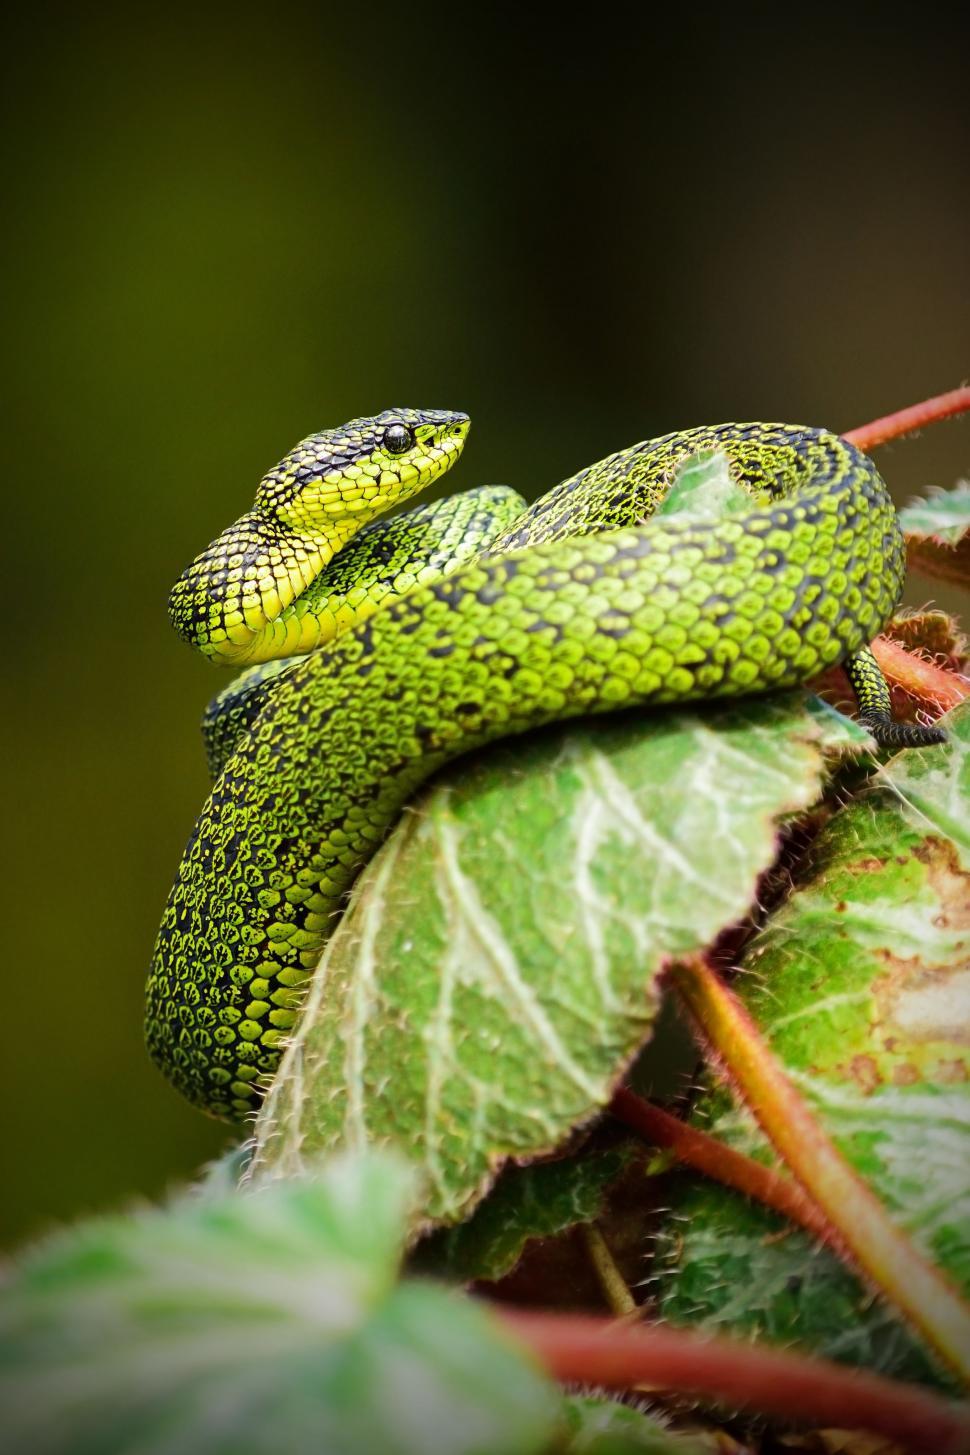 Free Image of Green Snake Perched on Leaf 